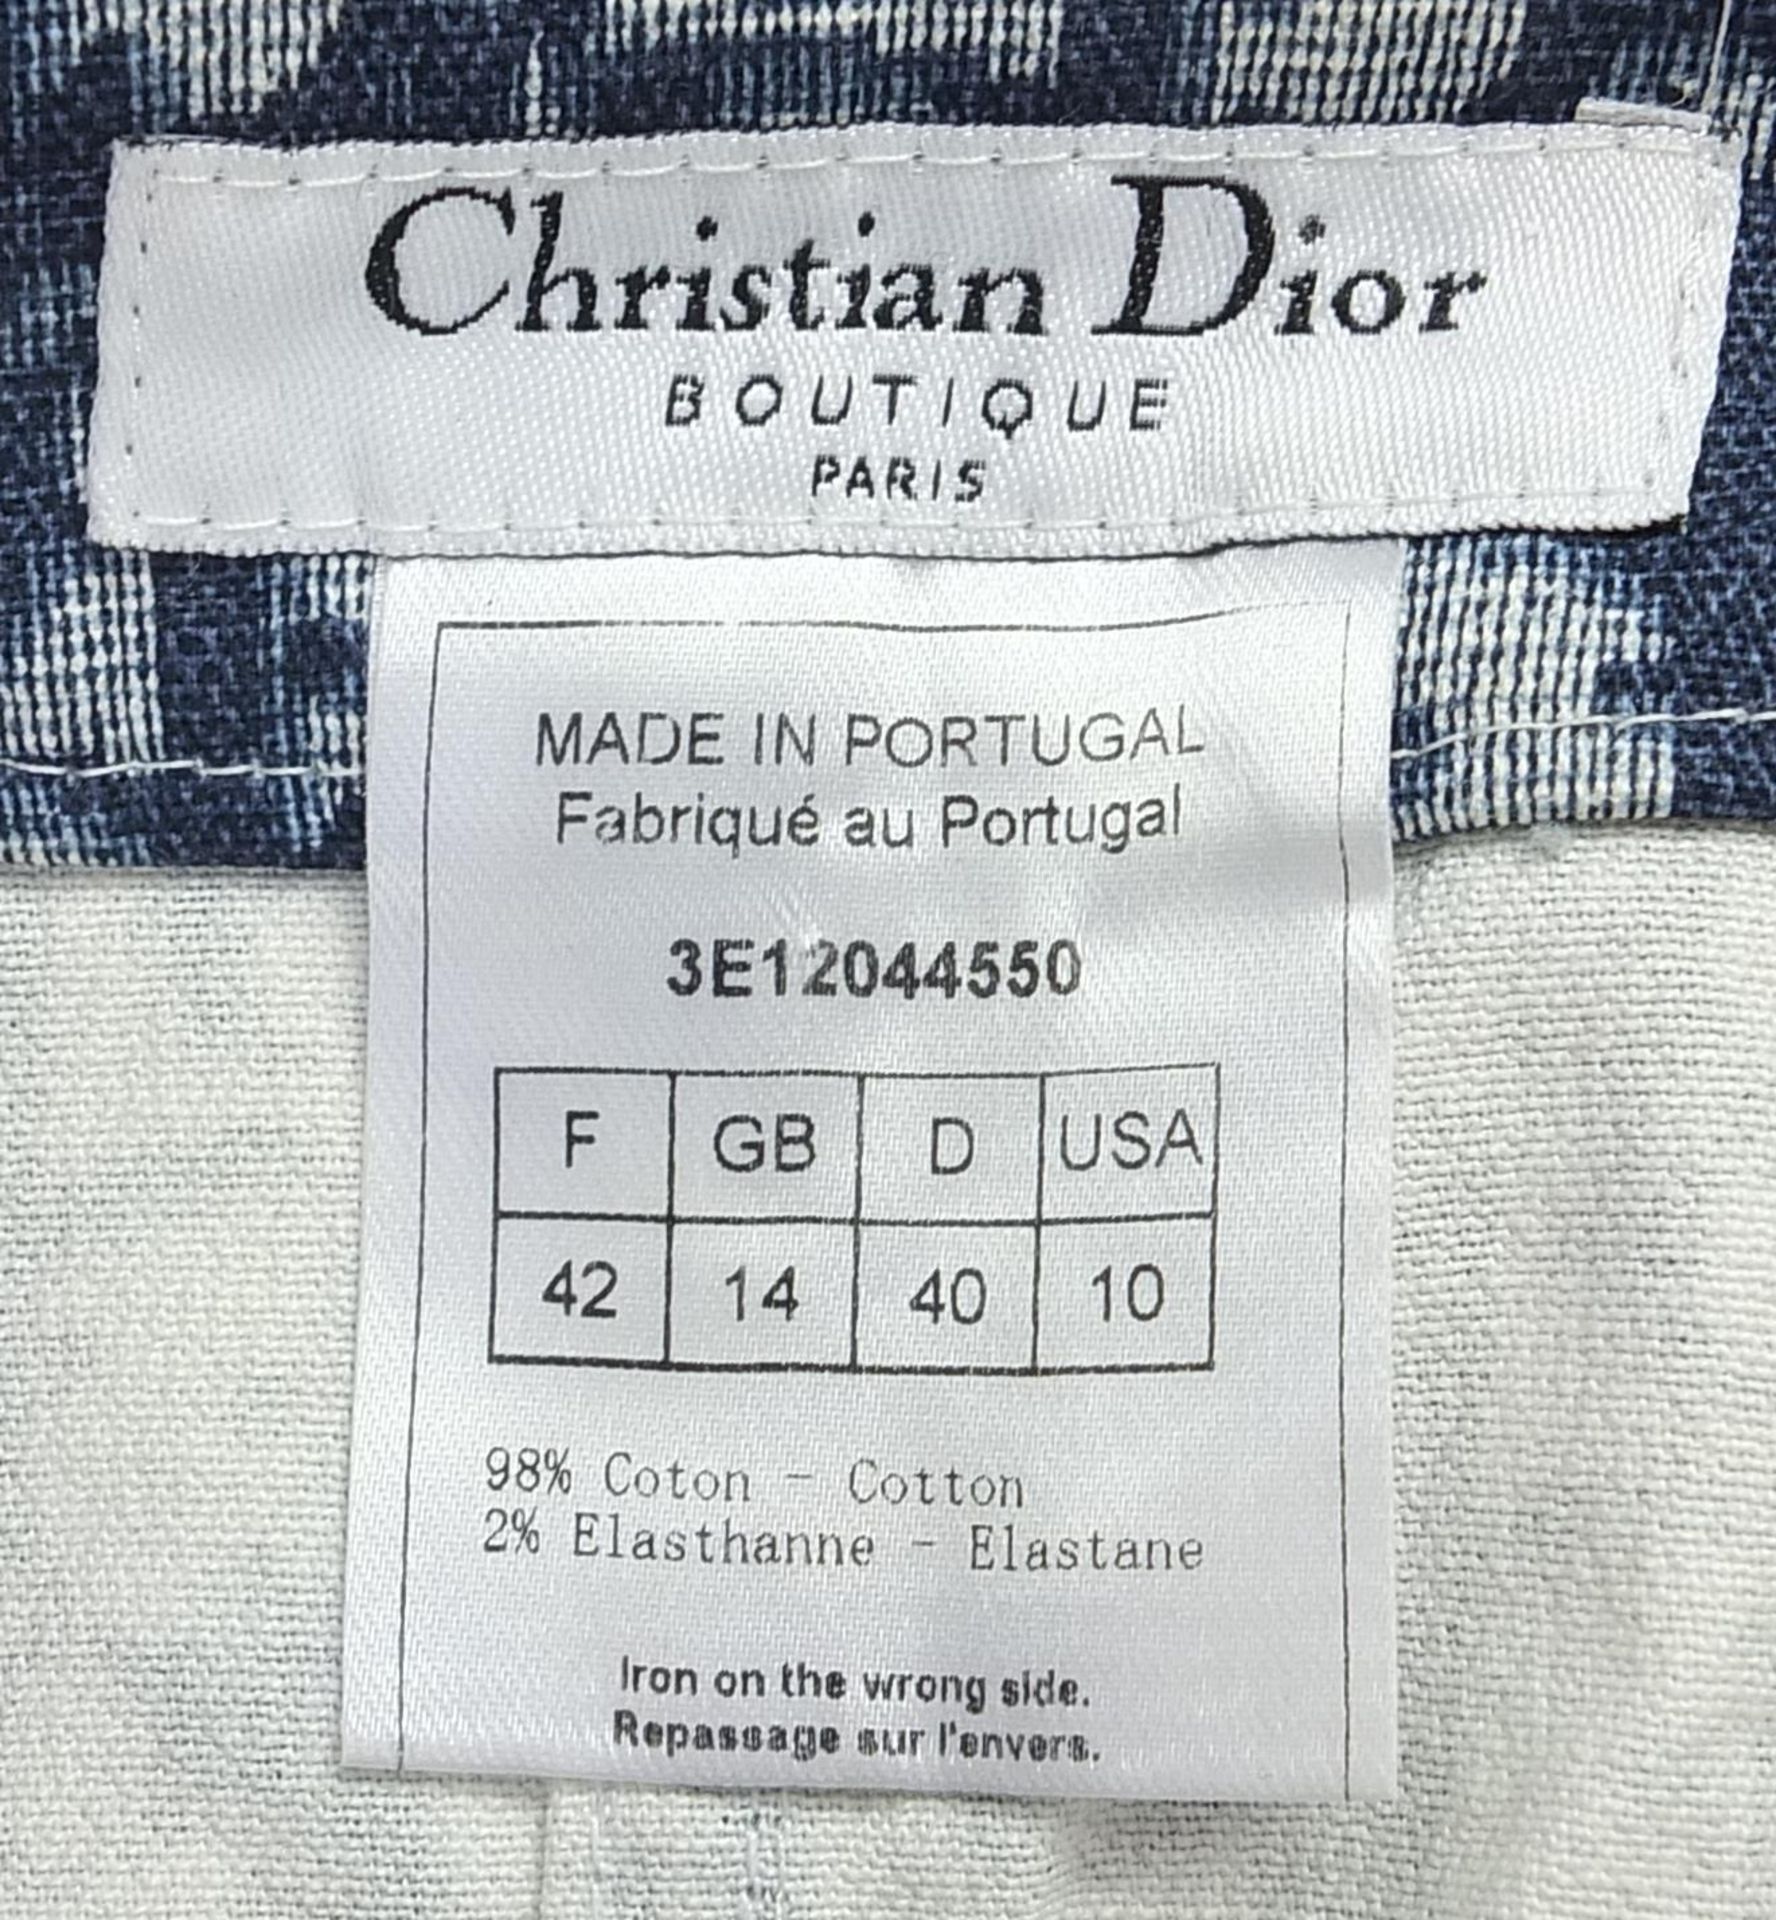 Pair of vintage Christian Dior monogrammed jeans, size 14 - Image 4 of 4